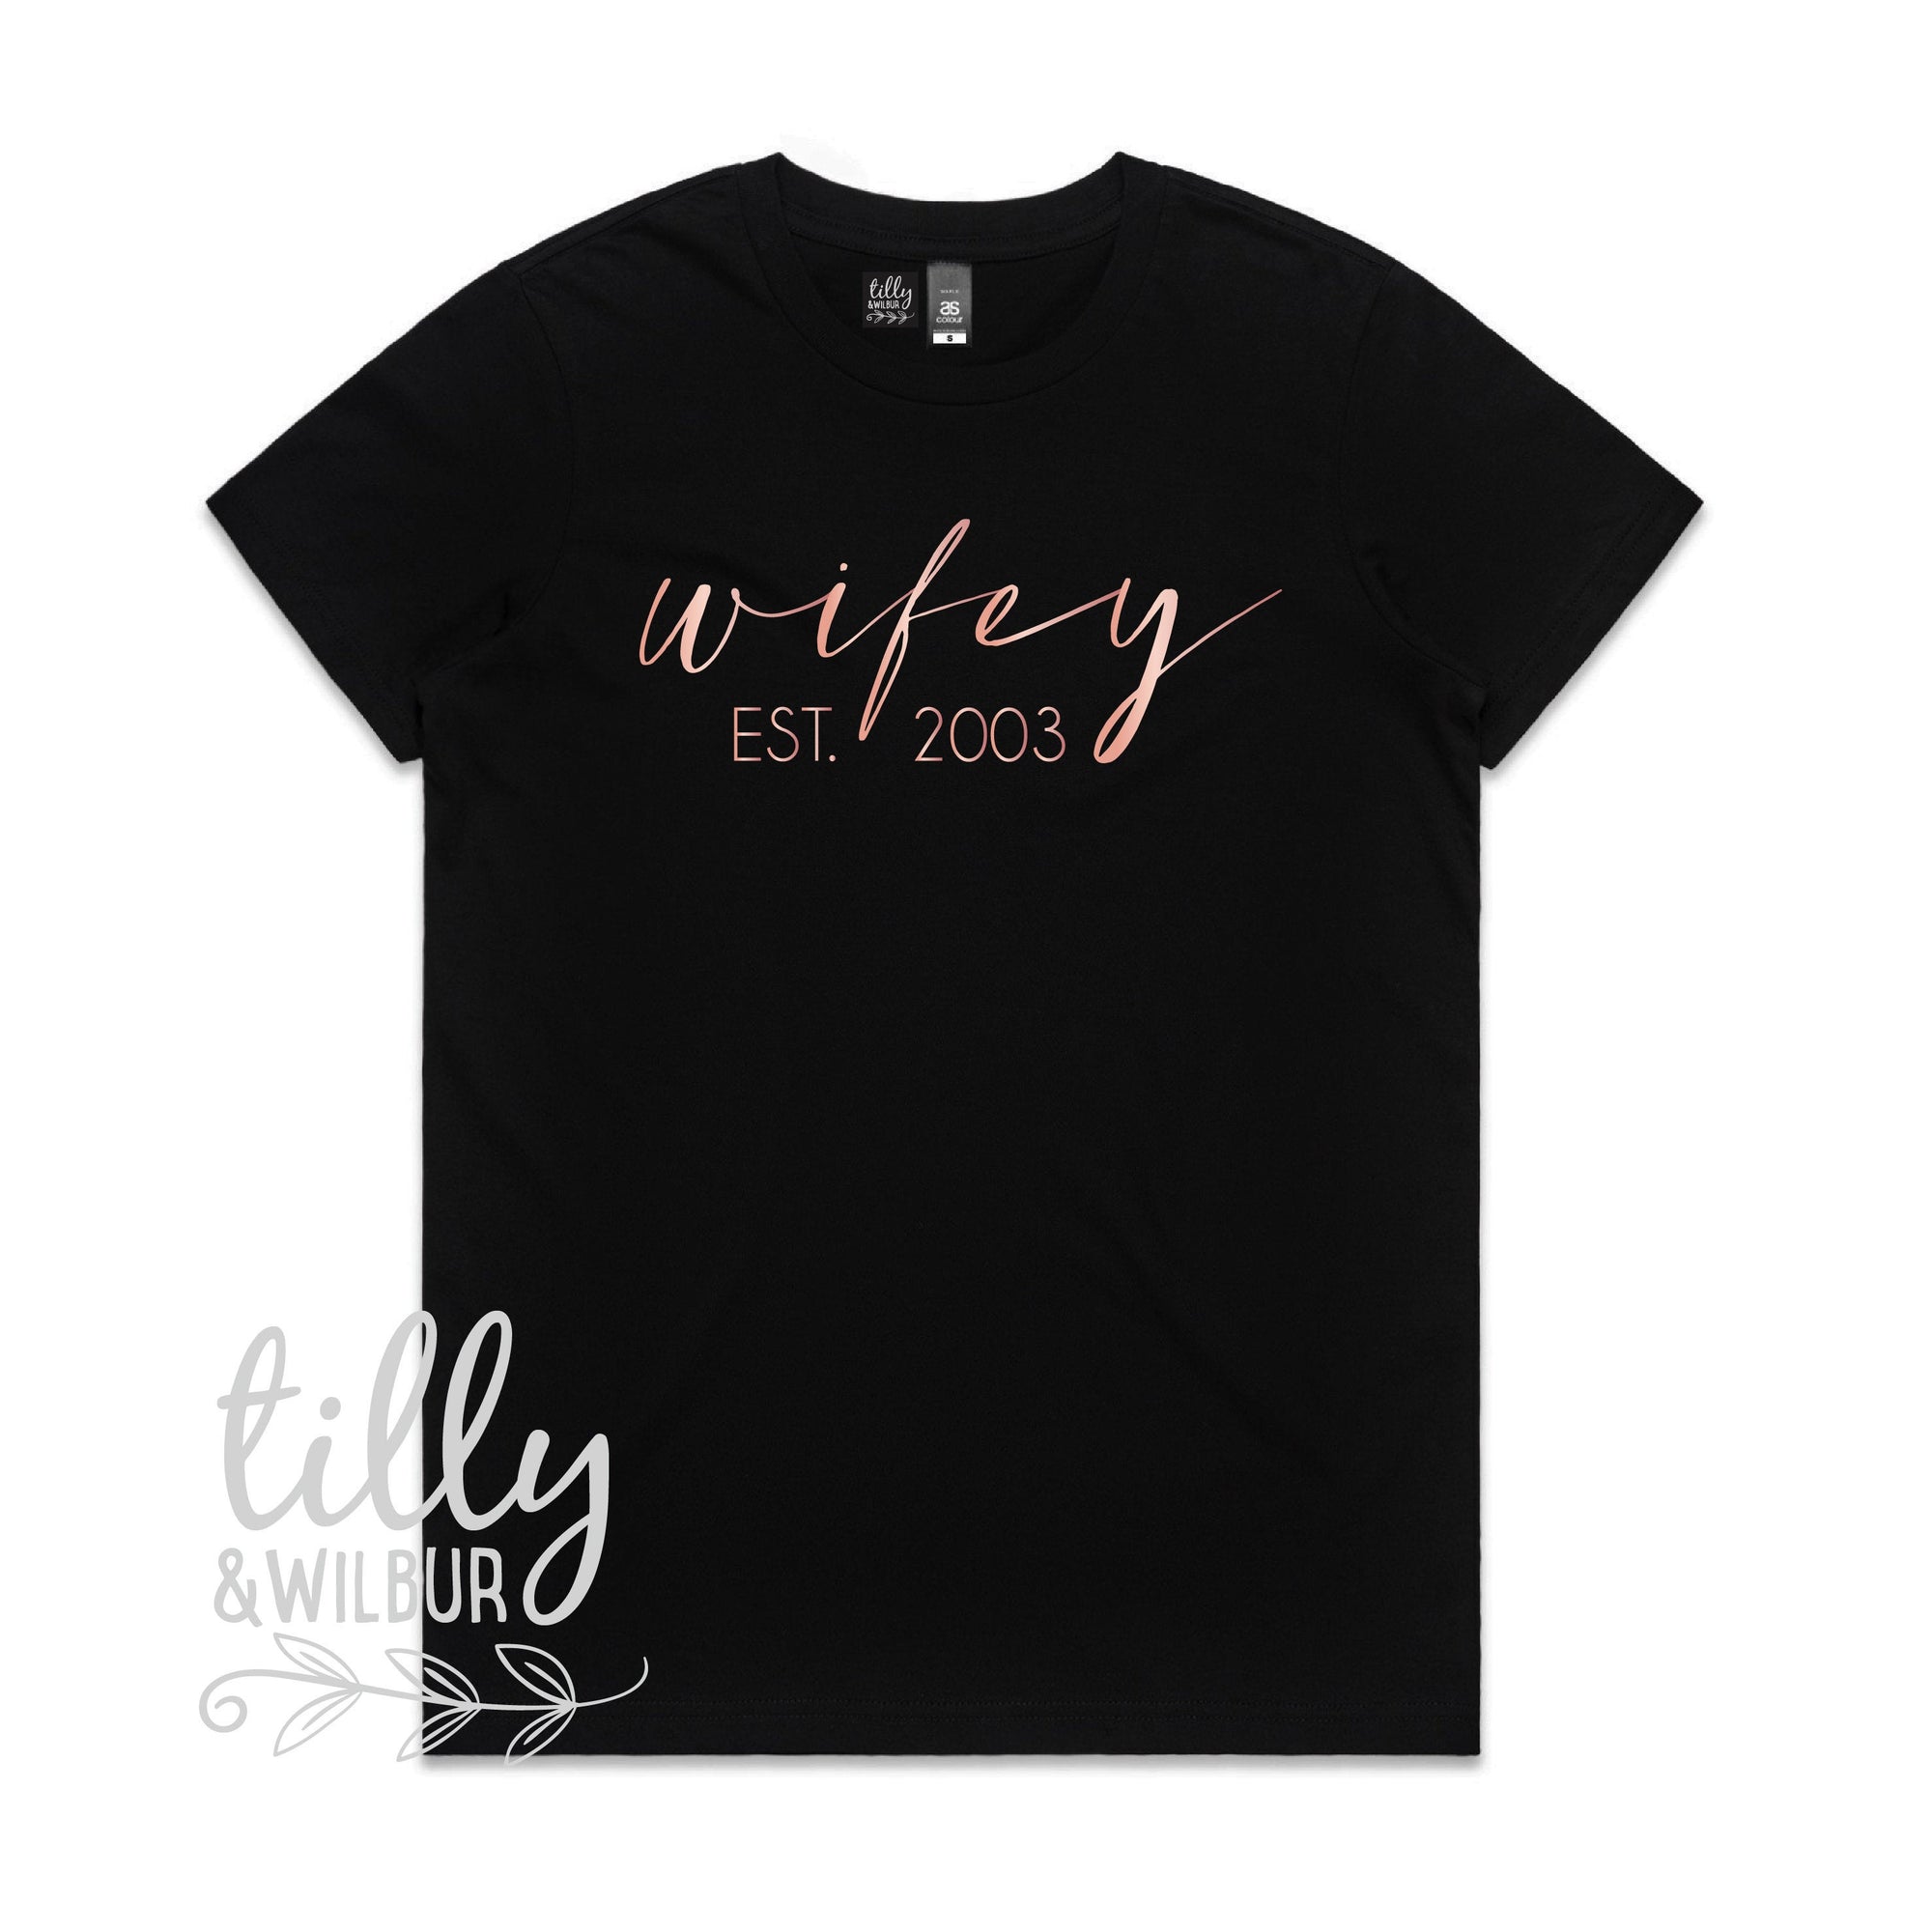 Wifey Est. T-Shirt For New Bride, Wifey Tee, Newlyweds, Rose Gold Print, Honeymoon Outfits, Wife Gift, Wedding Gift, His and Hers Clothing,